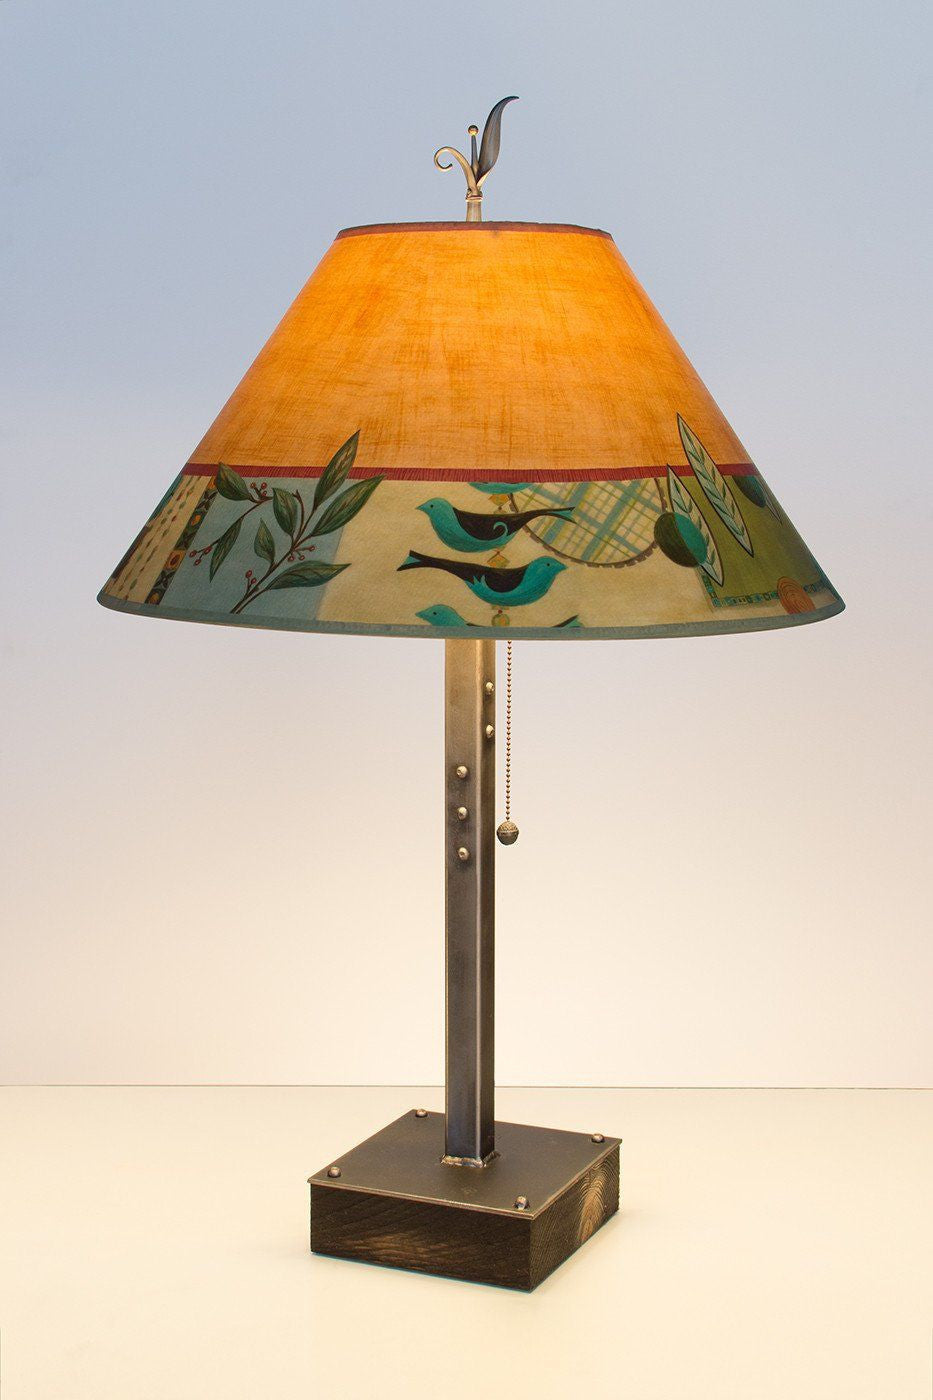 Janna Ugone &amp; Co Table Lamps Steel Table Lamp on Wood with Large Conical Shade in New Capri Spice